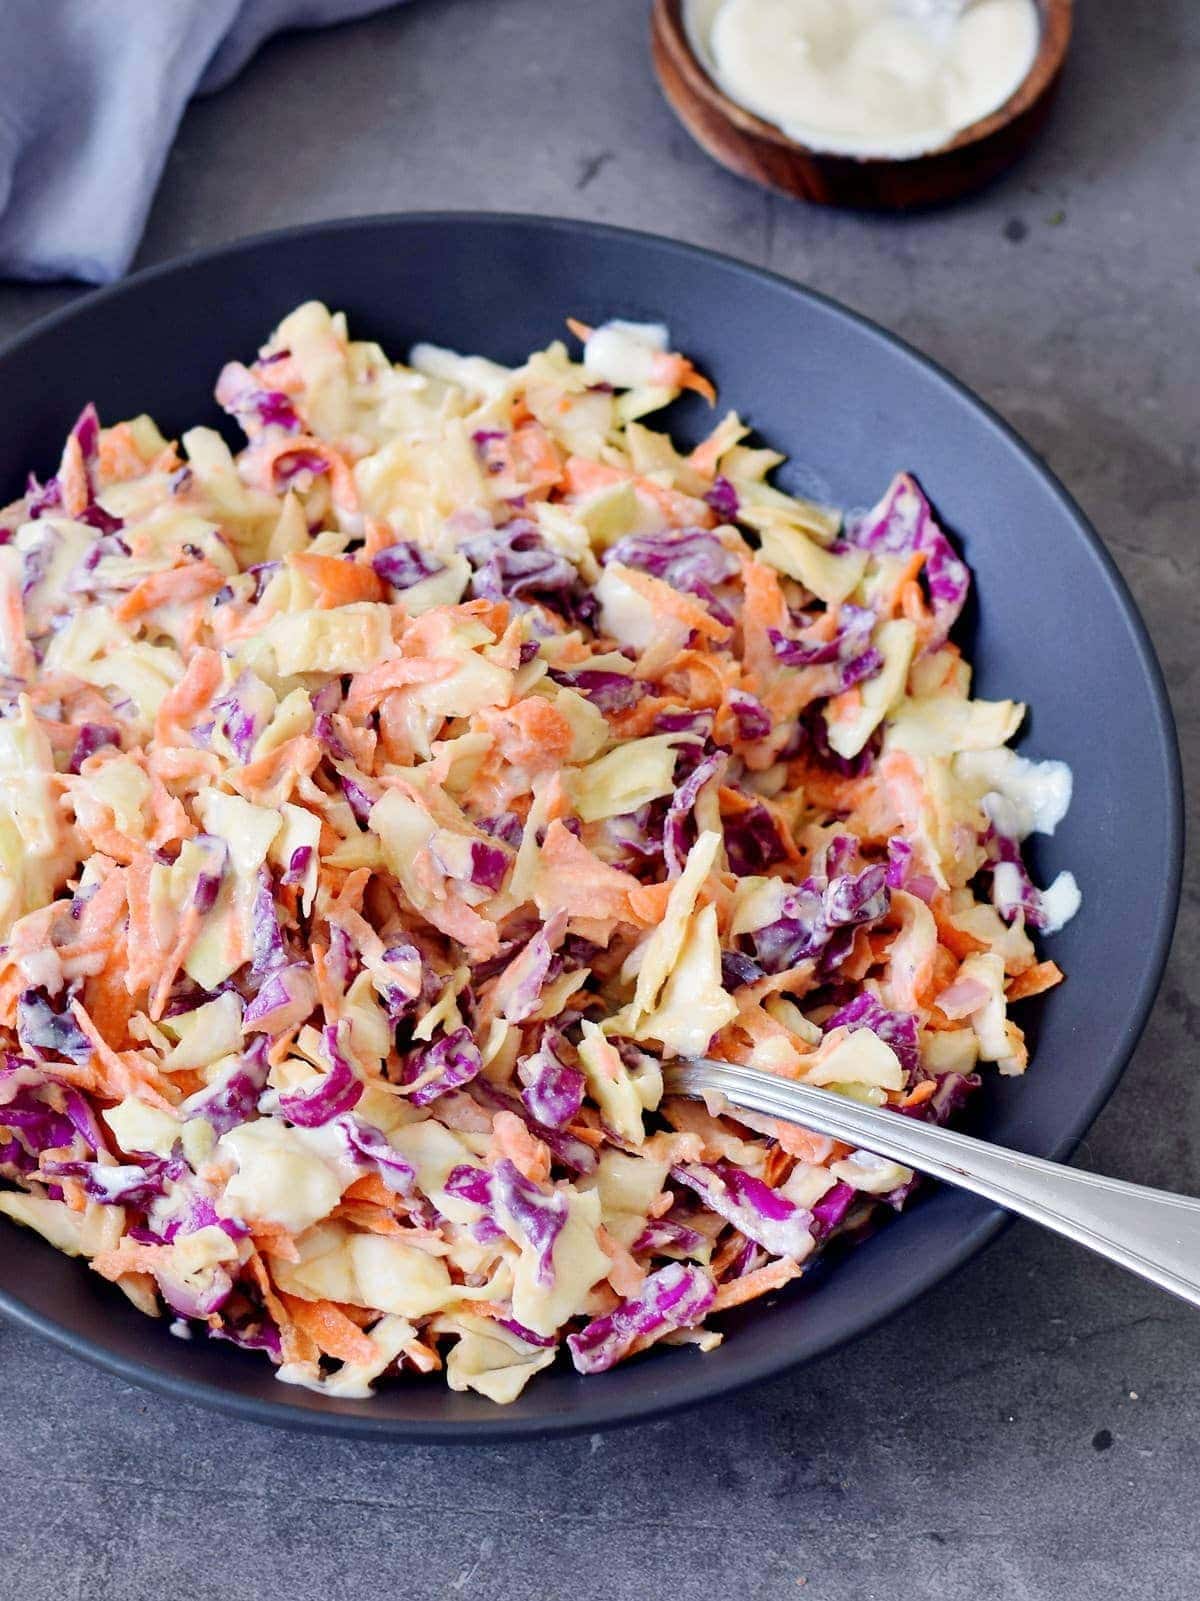 Coleslaw on a plate with spoon.